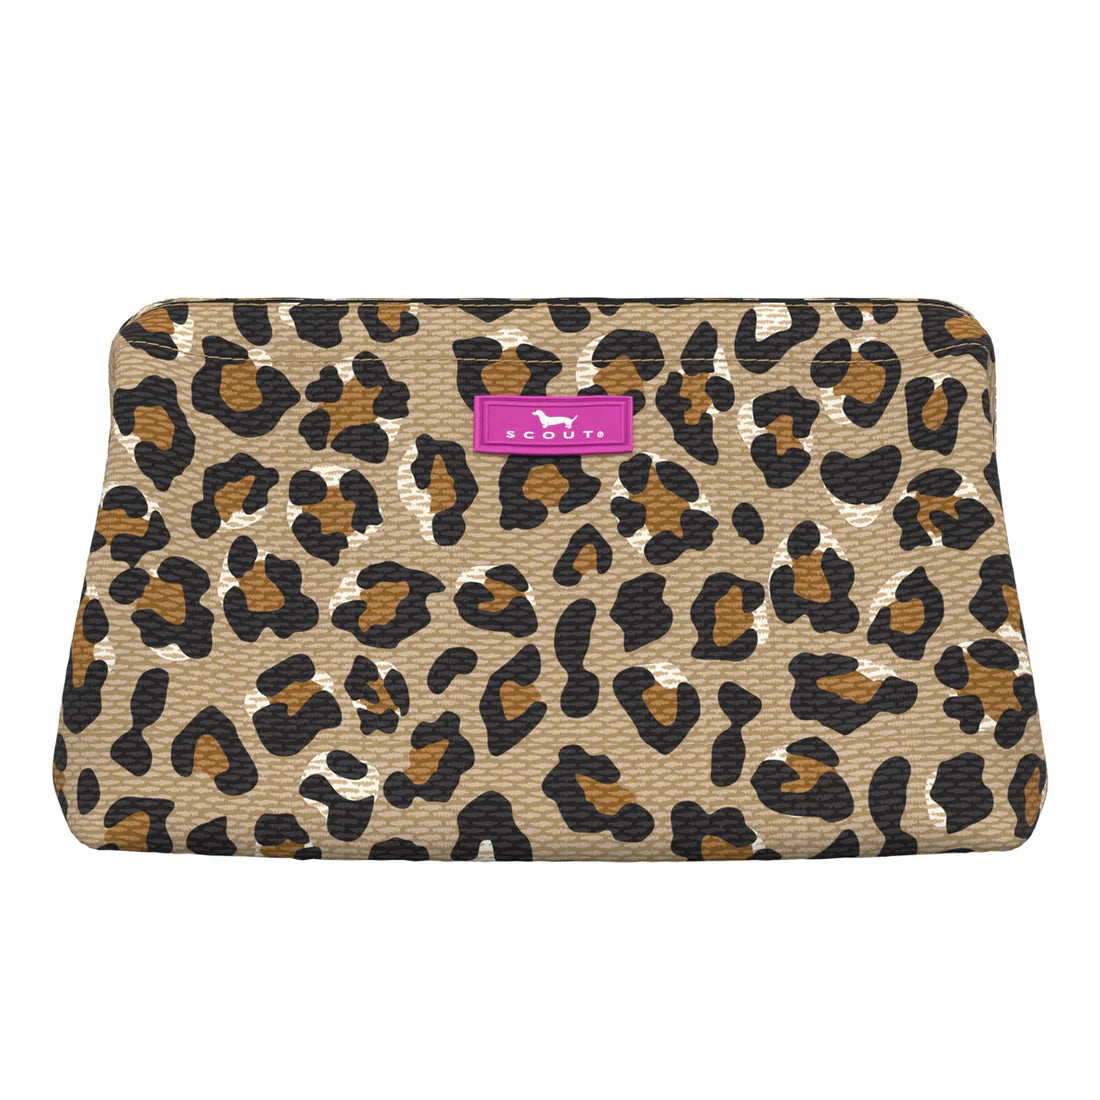 Scout Big Mouth Toiletry Bag - Cindy Clawford